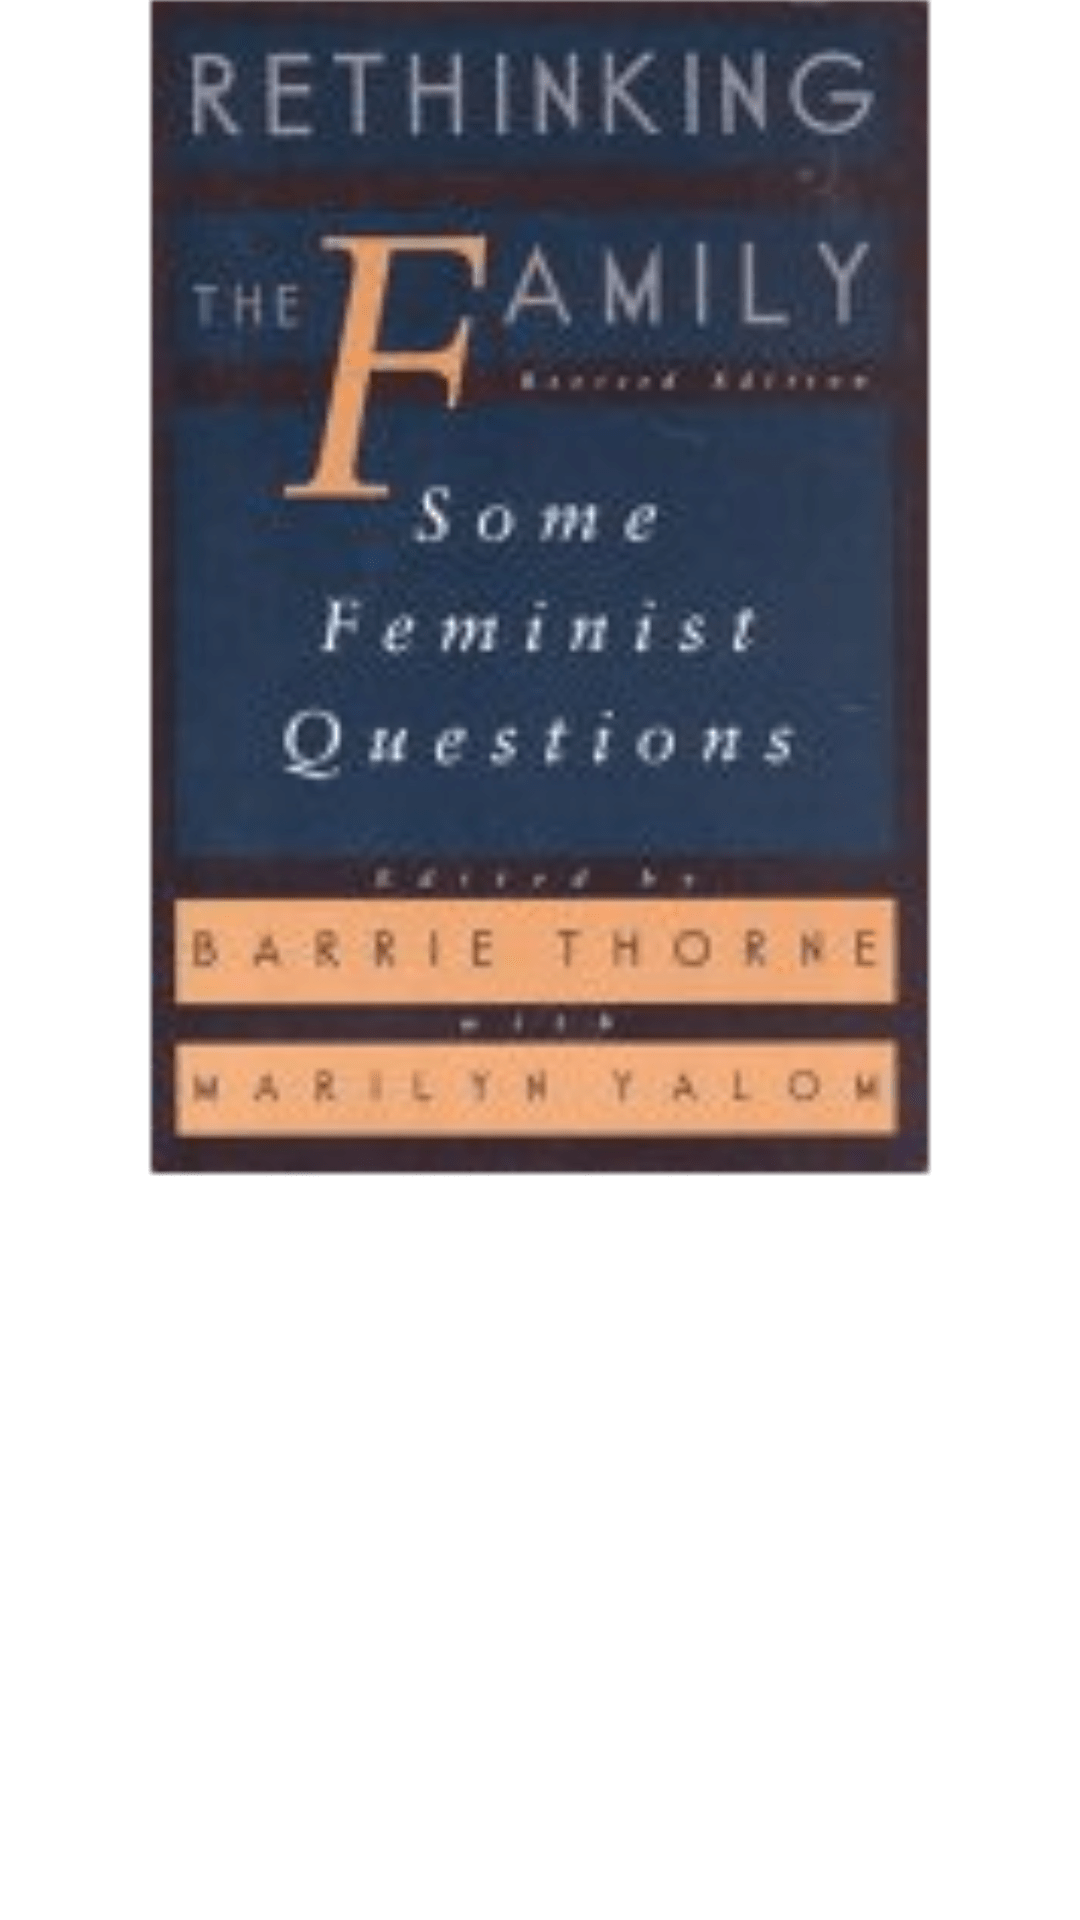 Rethinking the Family by Barrie Thorne